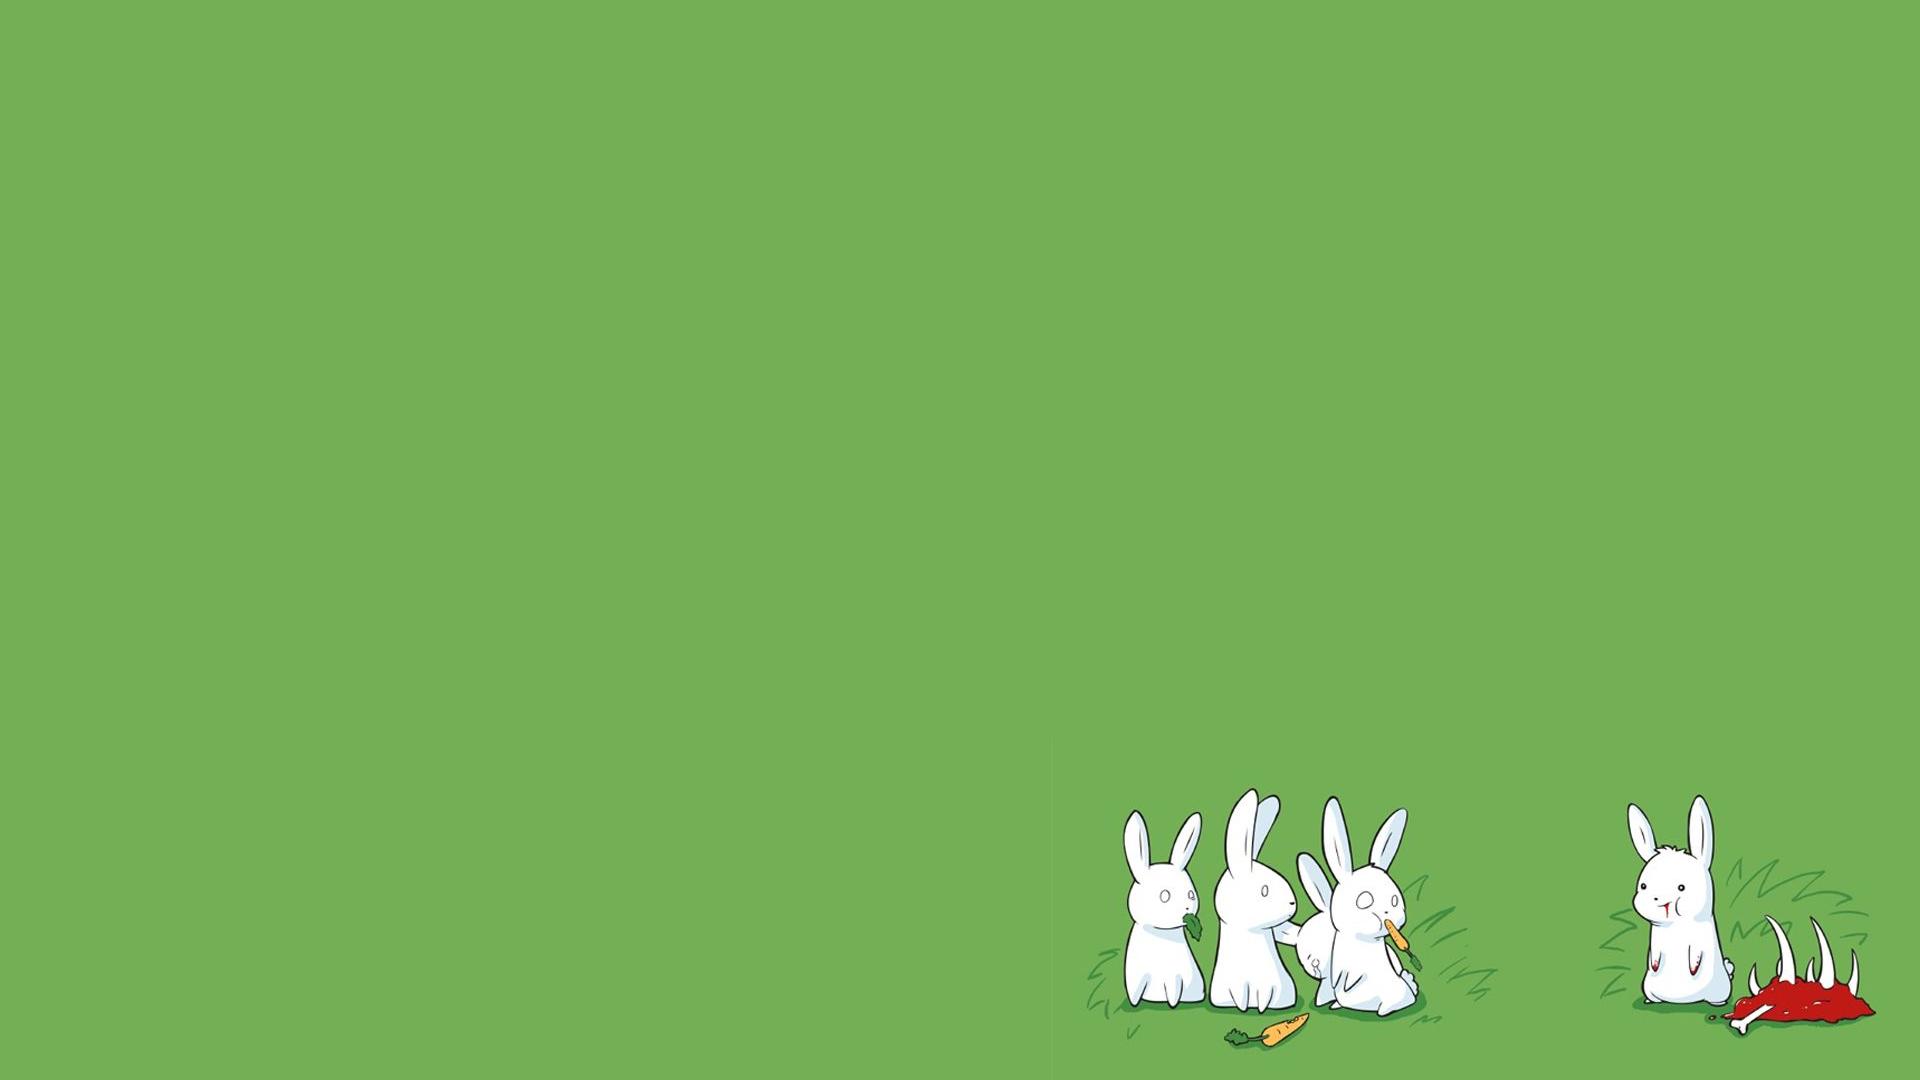 HD wallpaper, Meat, Green Background, Rabbits, Humor, Scared Rabbits, Green